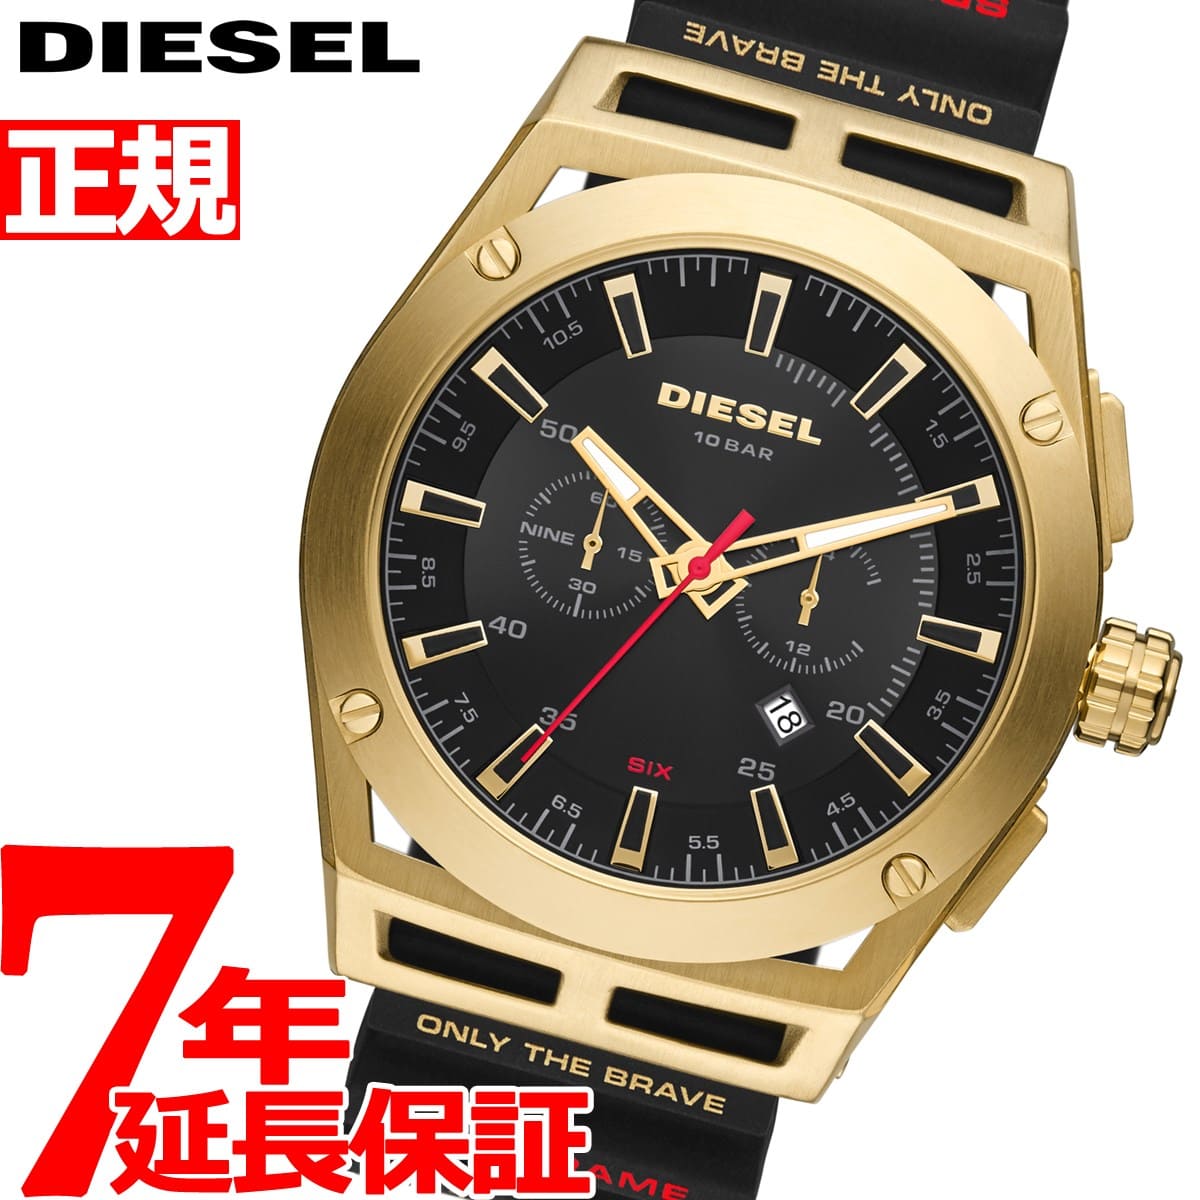 New]up to 2,000 & up to 57 times! It is TIMEFRAME Chronograph DZ4546 2021  latest in diesel DIESEL mens time frame until 1:59 on - March 11 at 20:00  on March 4 - BE FORWARD Store